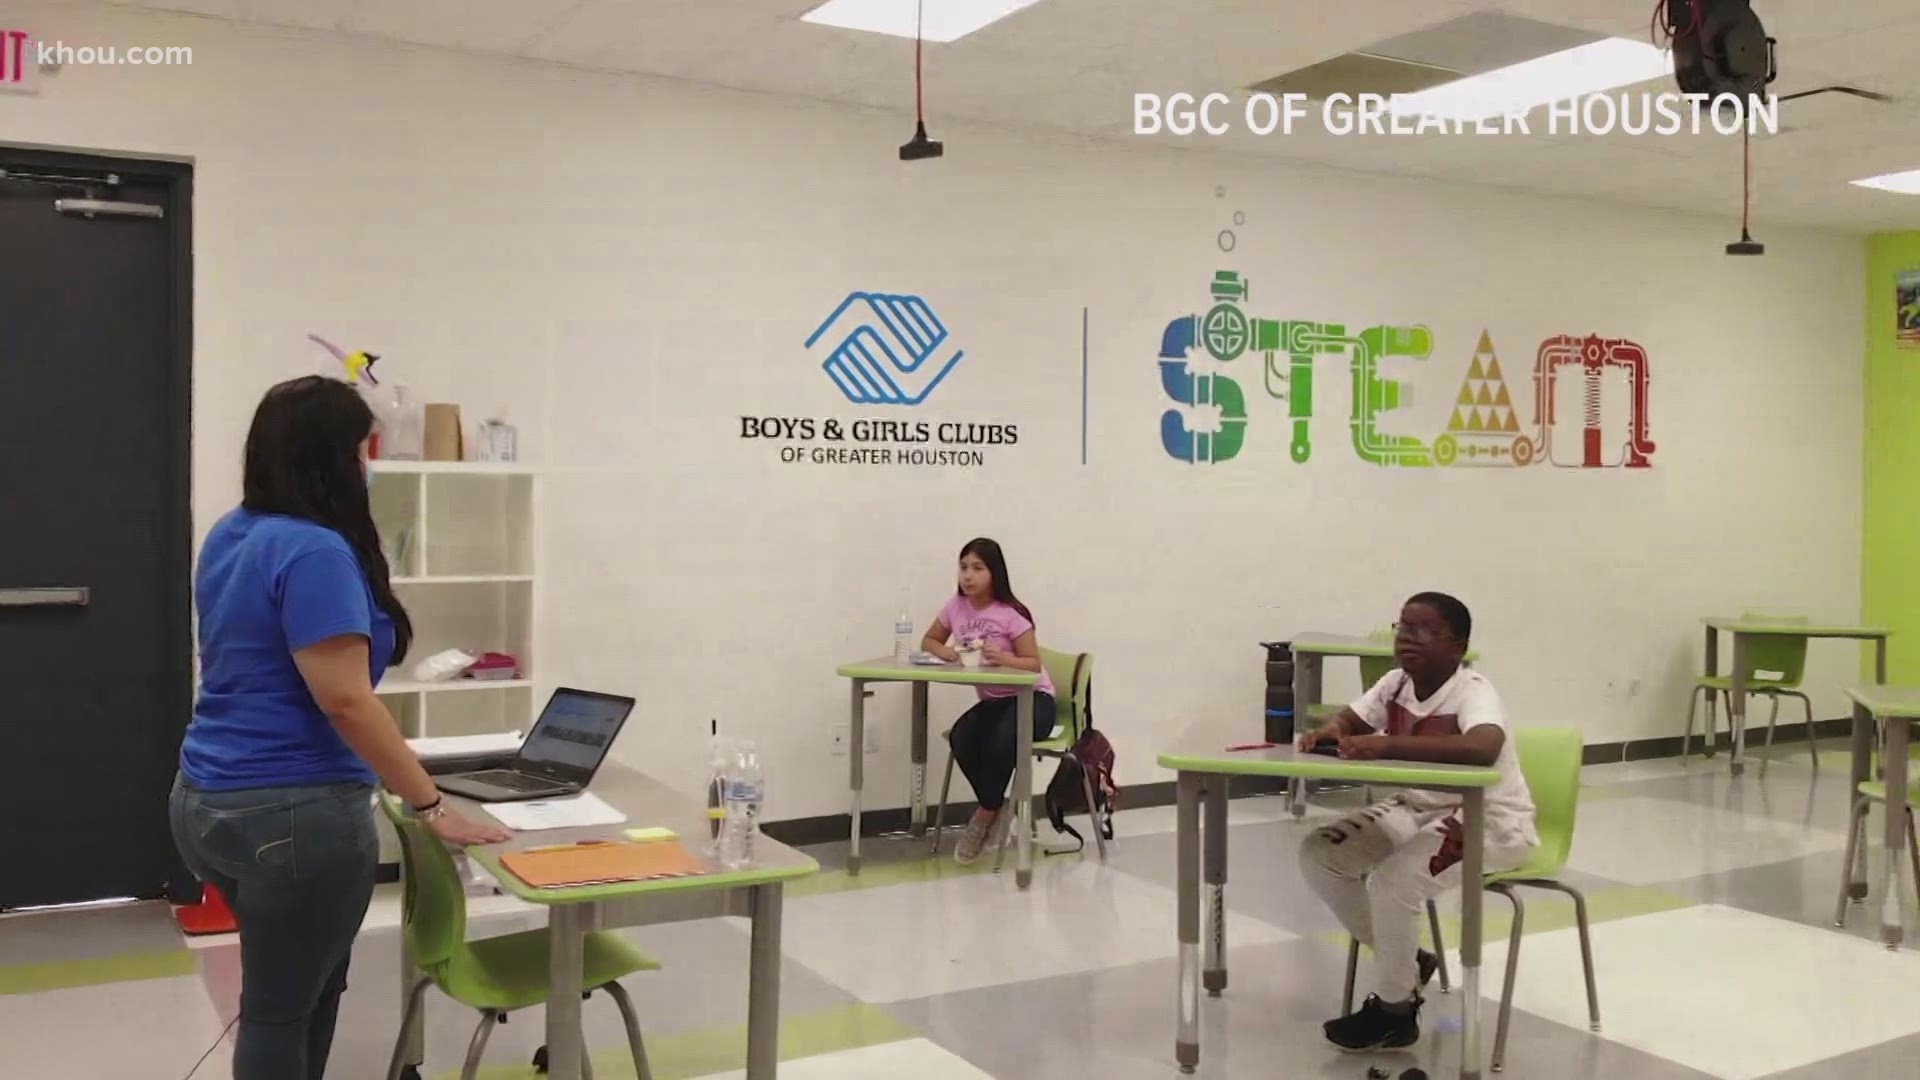 Boys and Girls Club of Greater Houston is one of many groups stepping up to help local children with virtual learning. Here's how you can support their efforts.